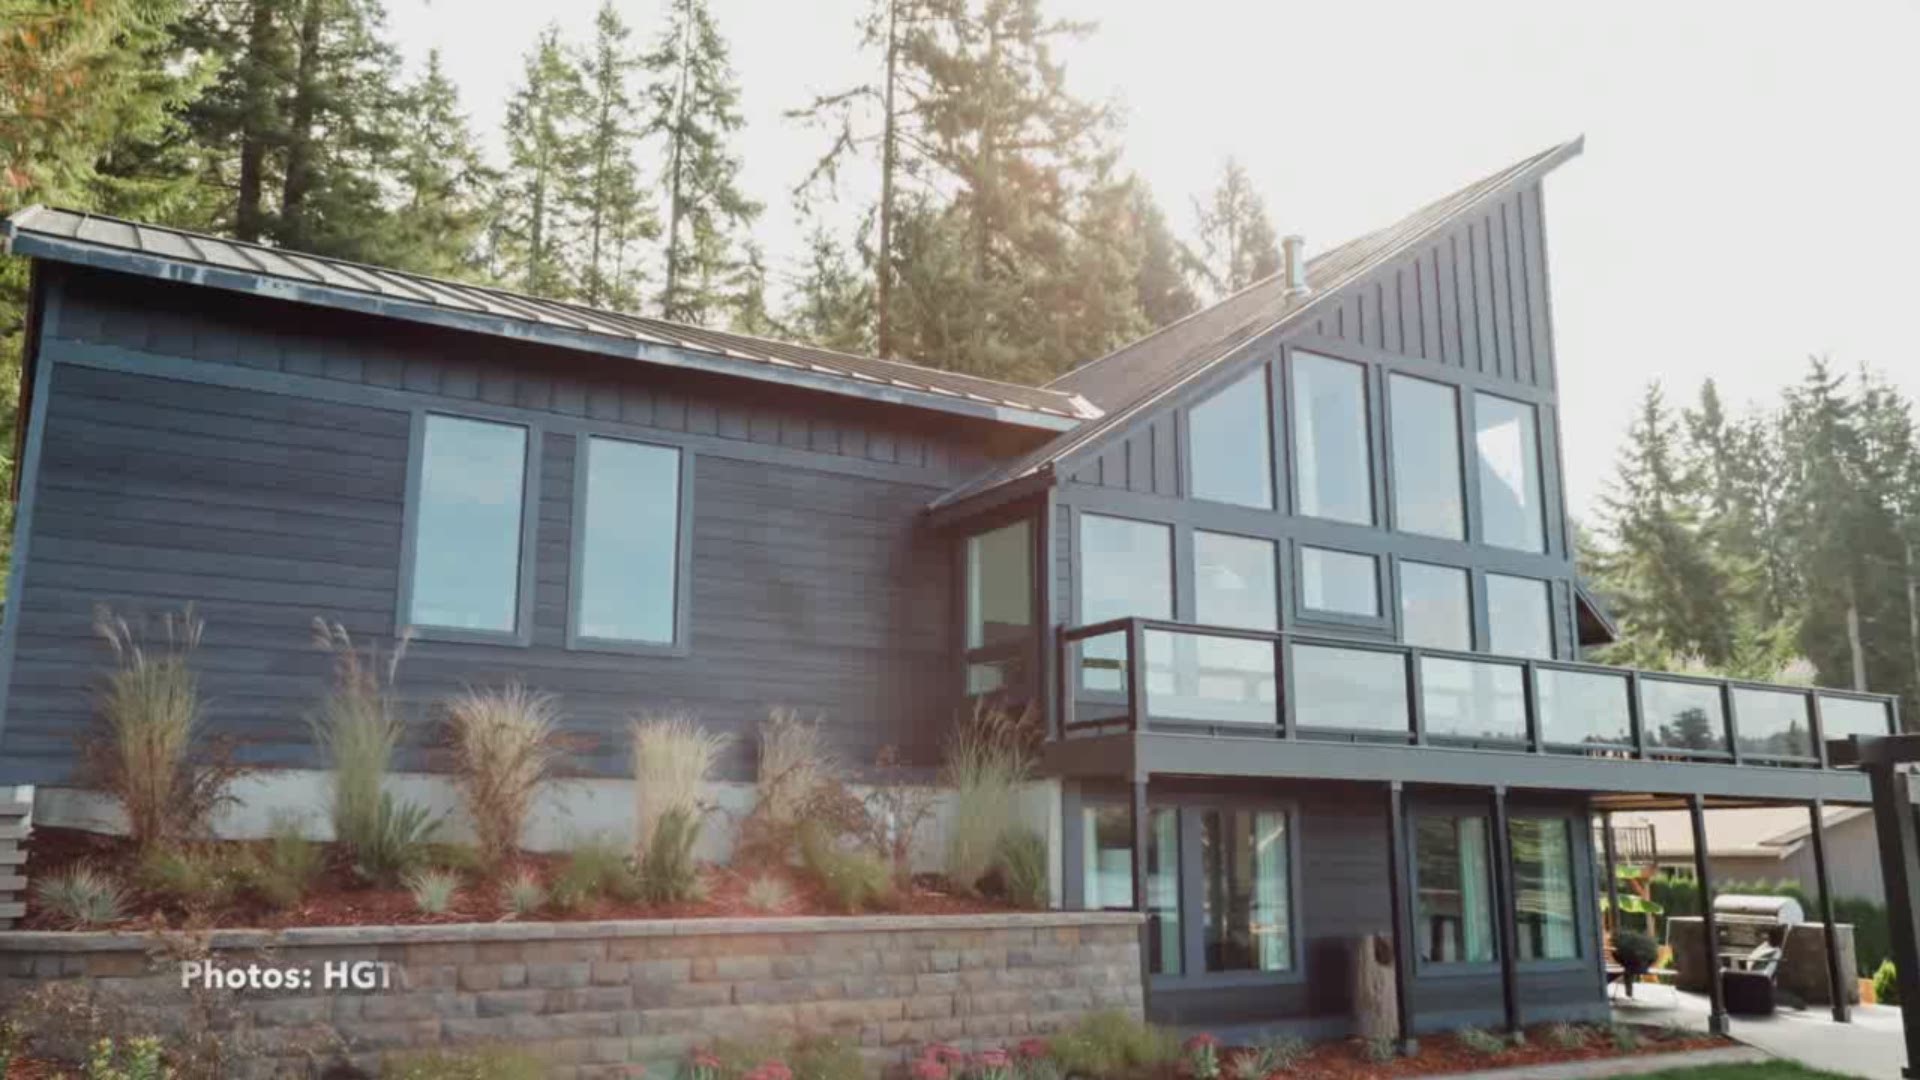 For the first time in its 22-year history, the HGTV Dream Home giveaway has picked a home in Washington state. This one is located on the waterfront in Gig Harbor.